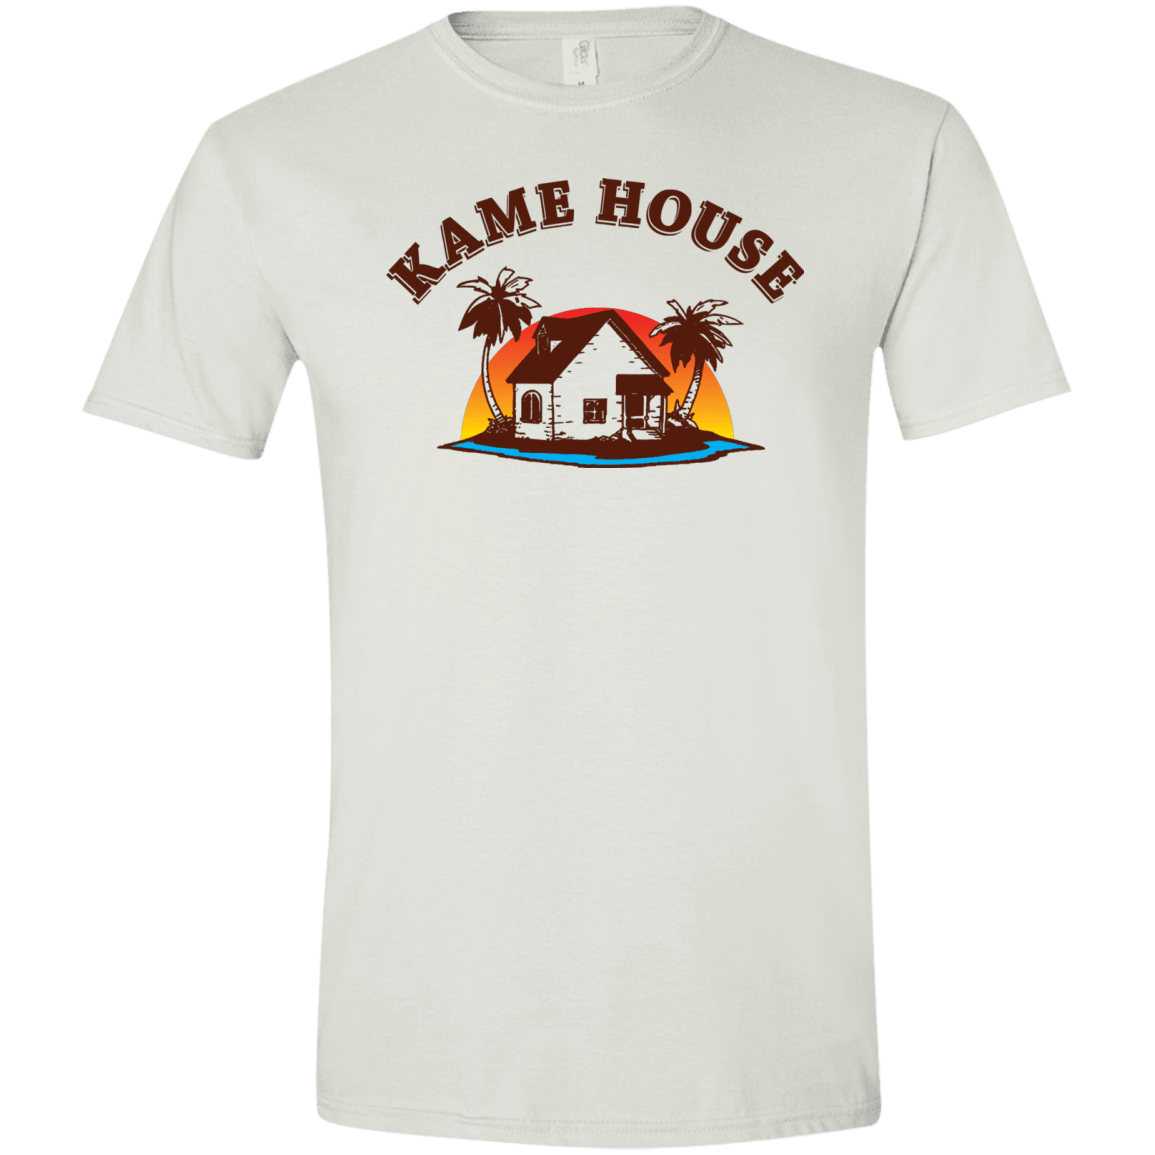 T-Shirts White / X-Small Kame House Men's Semi-Fitted Softstyle